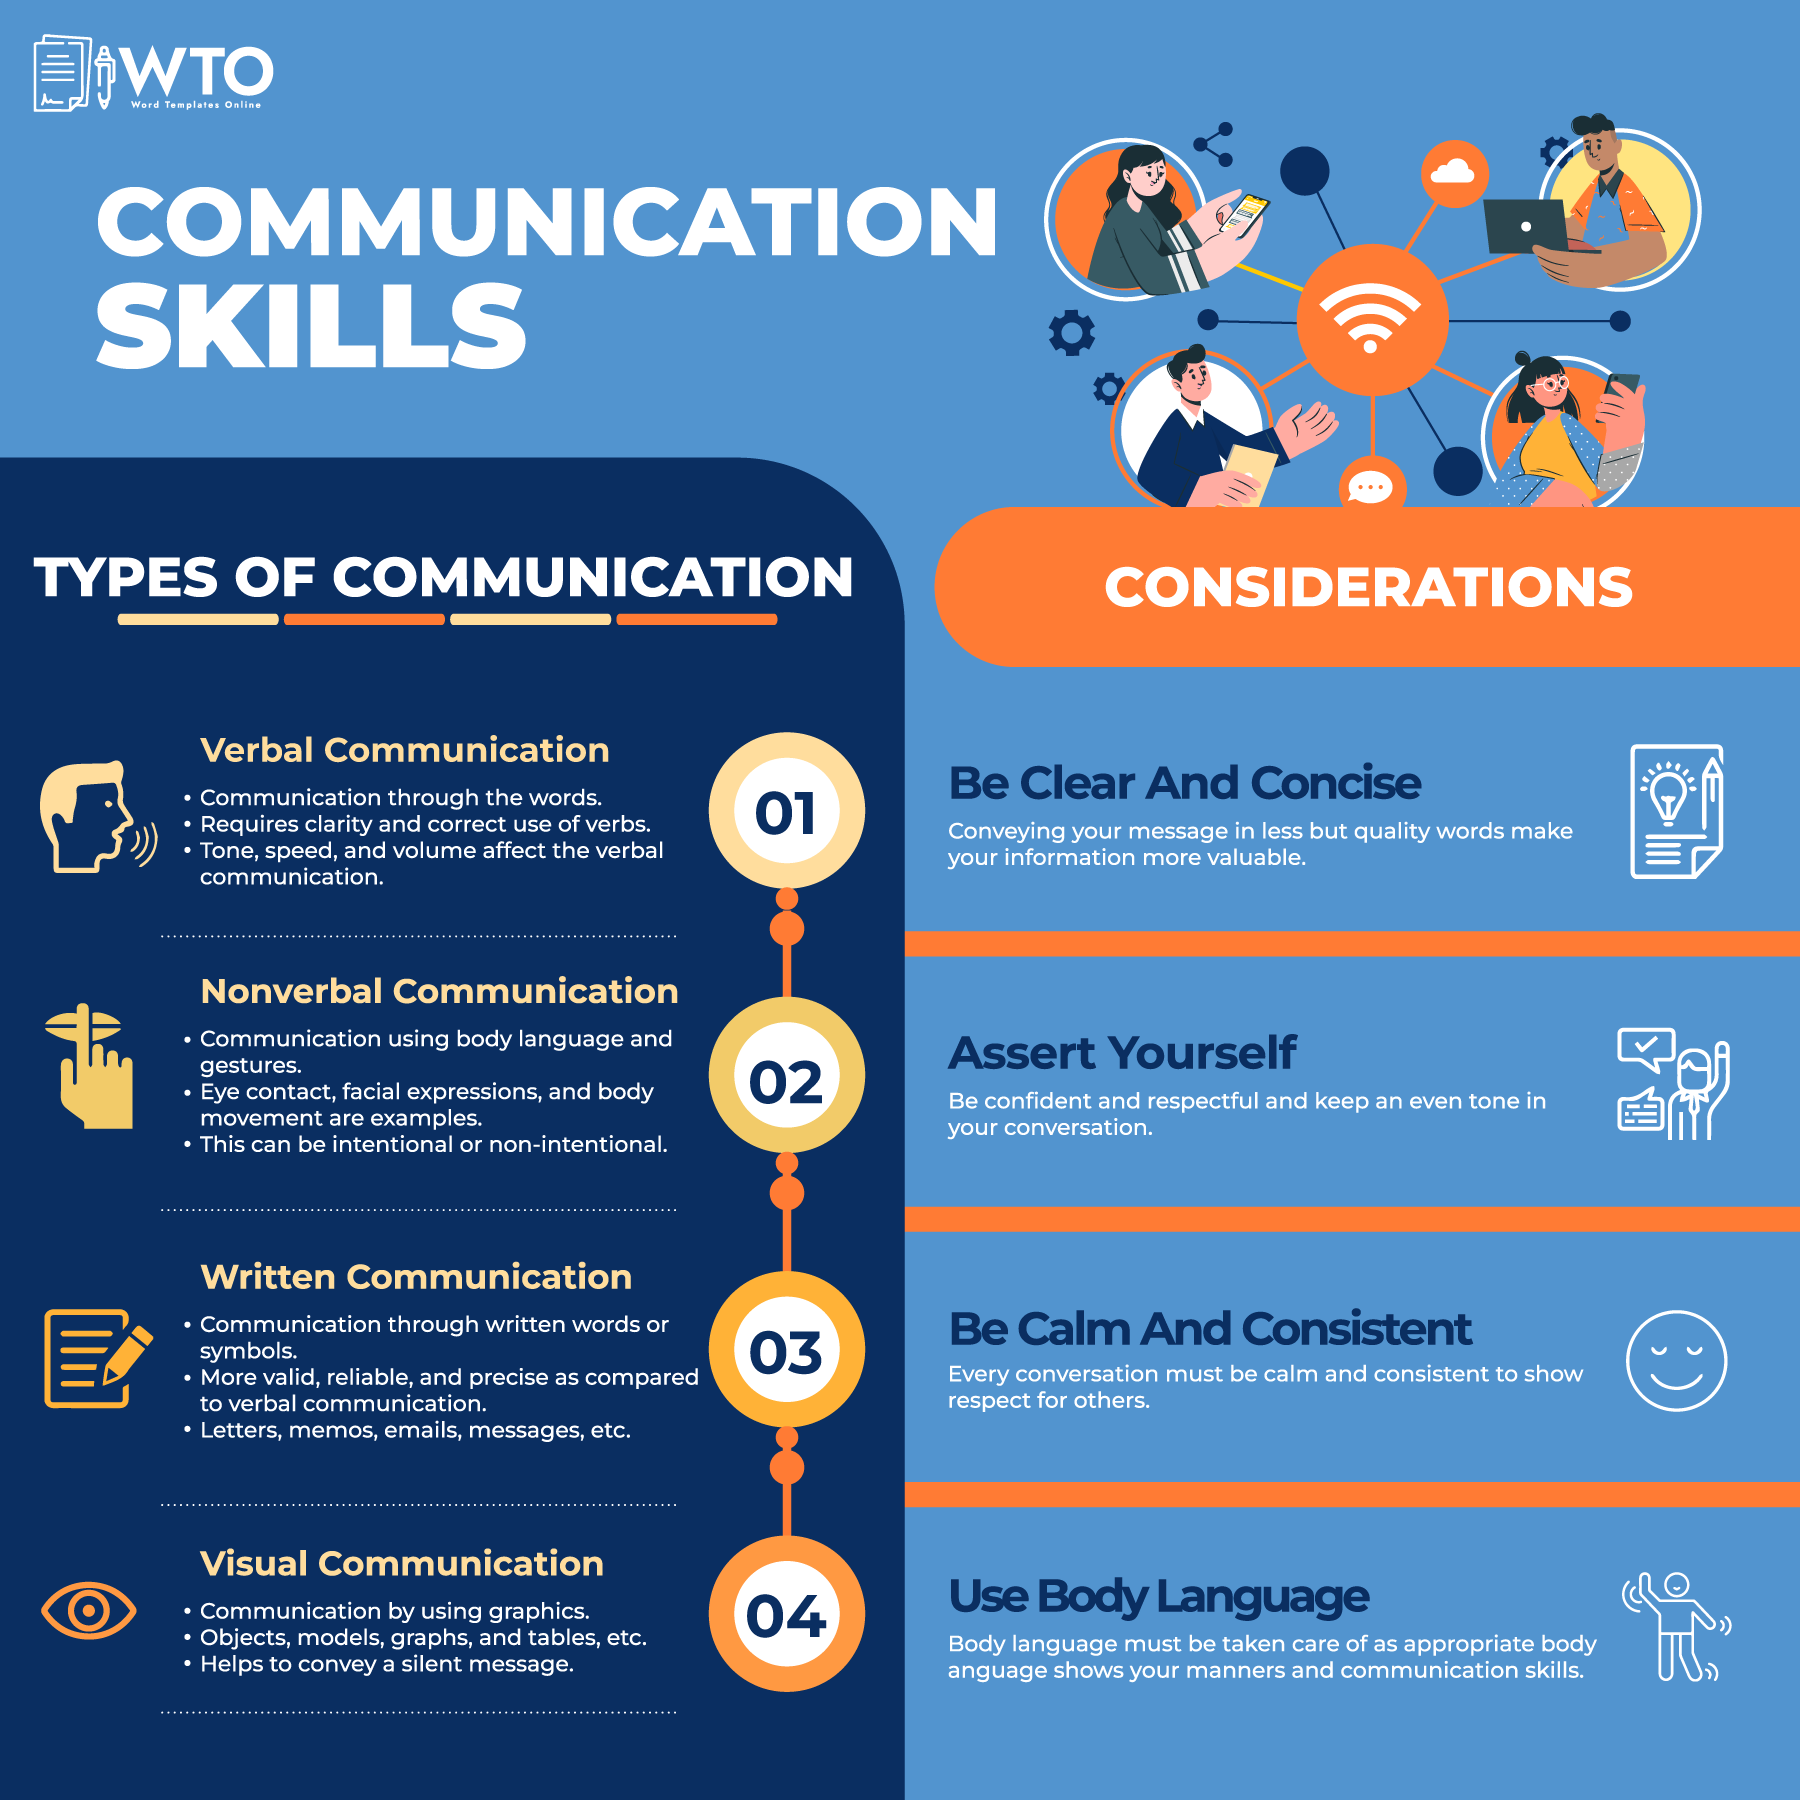 This infographic is about the types of communication skills and the considerations.